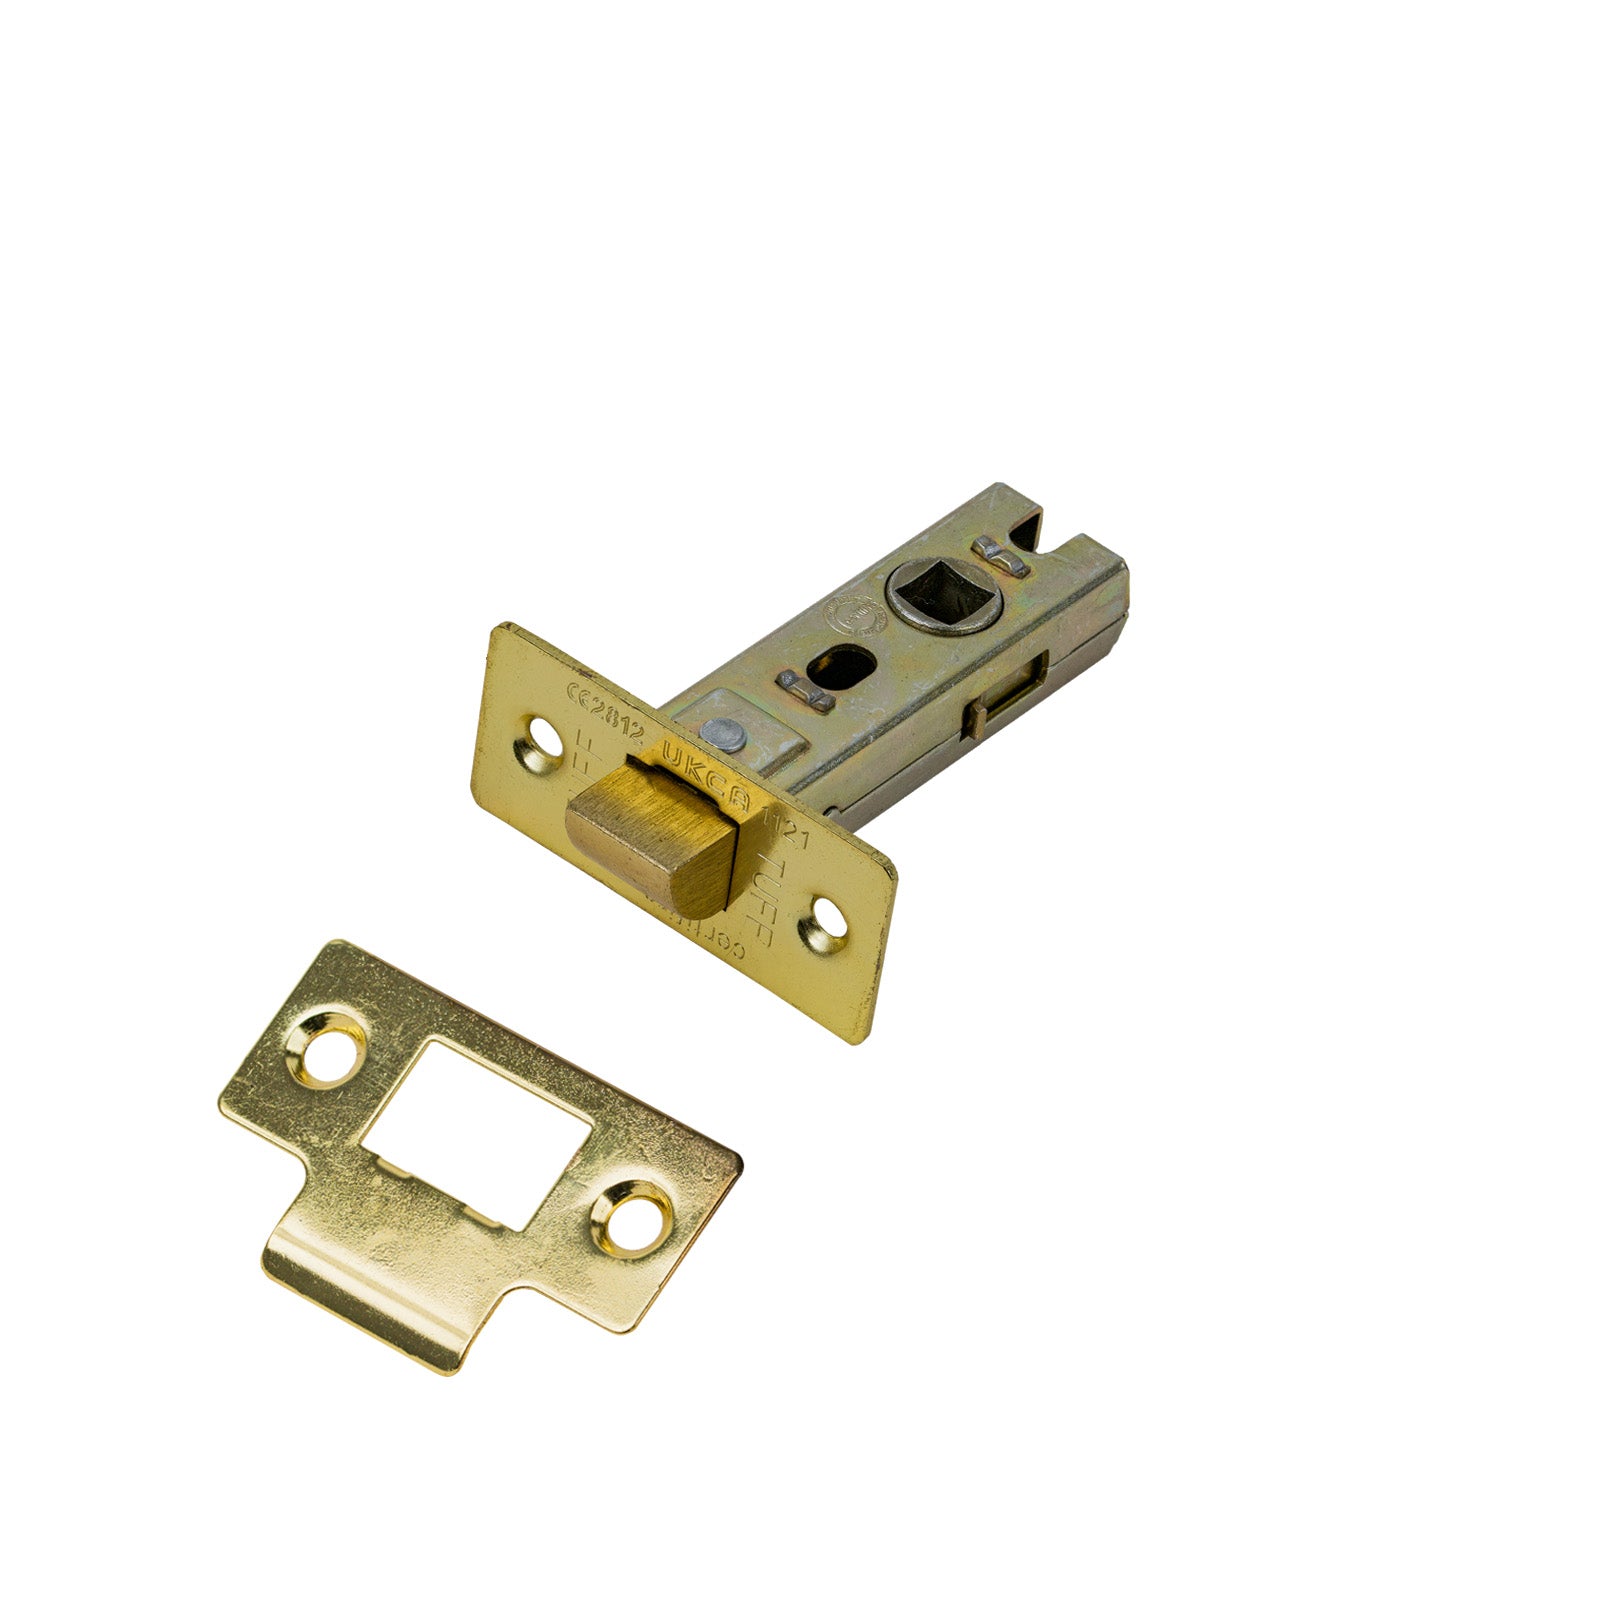 SHOW Tubular Latch - 2.5 Inch with Polished brass finished forend and striker plate